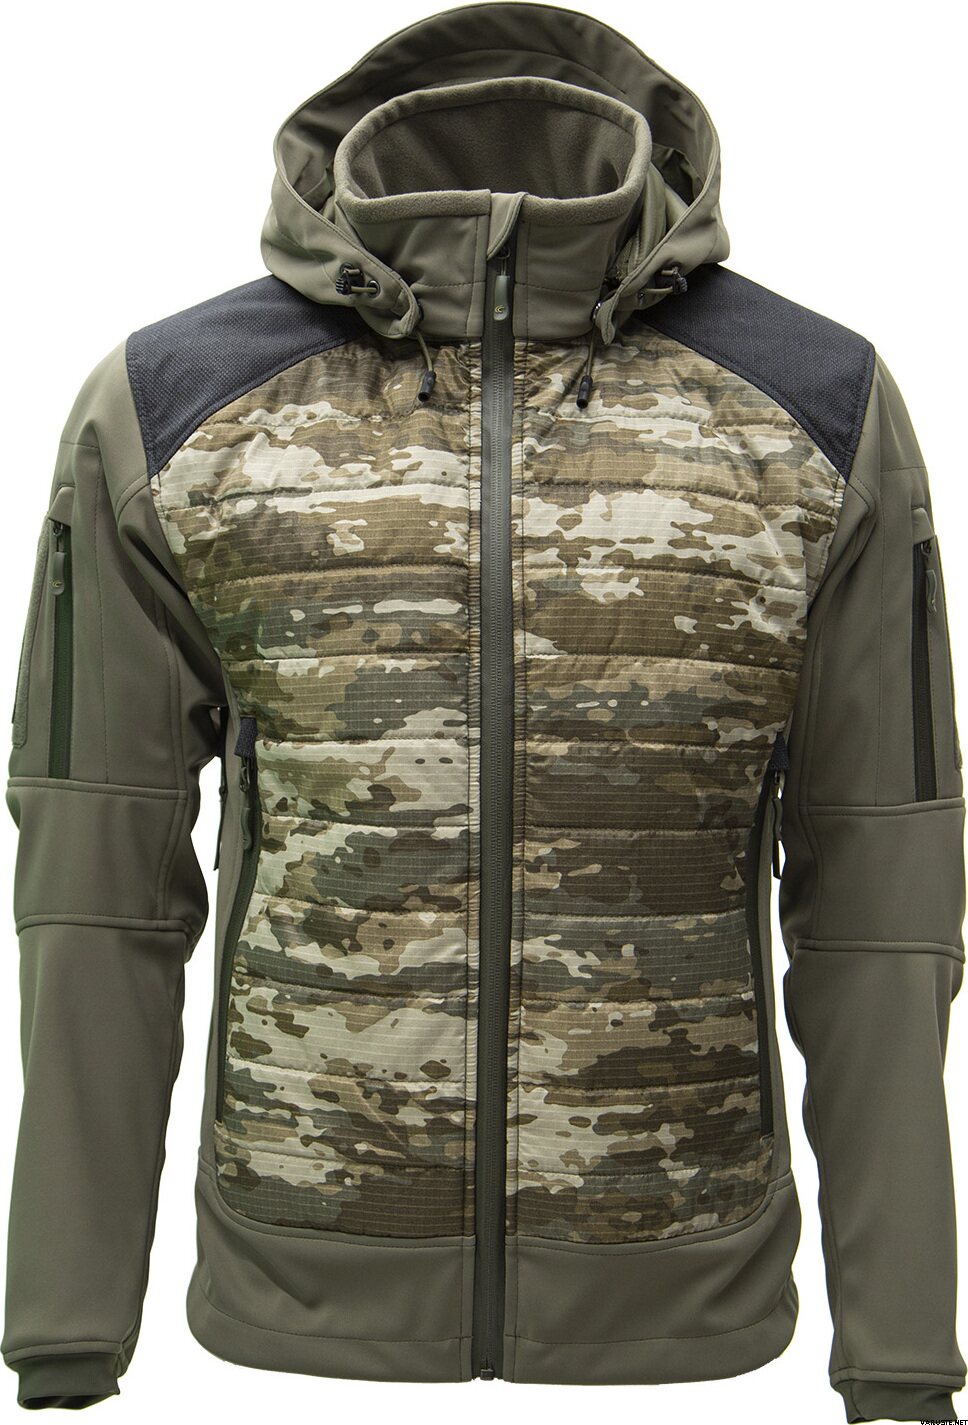 Carinthia G-LOFT ISG 2.0 Jacket Special Edition | Tactical Winter ...